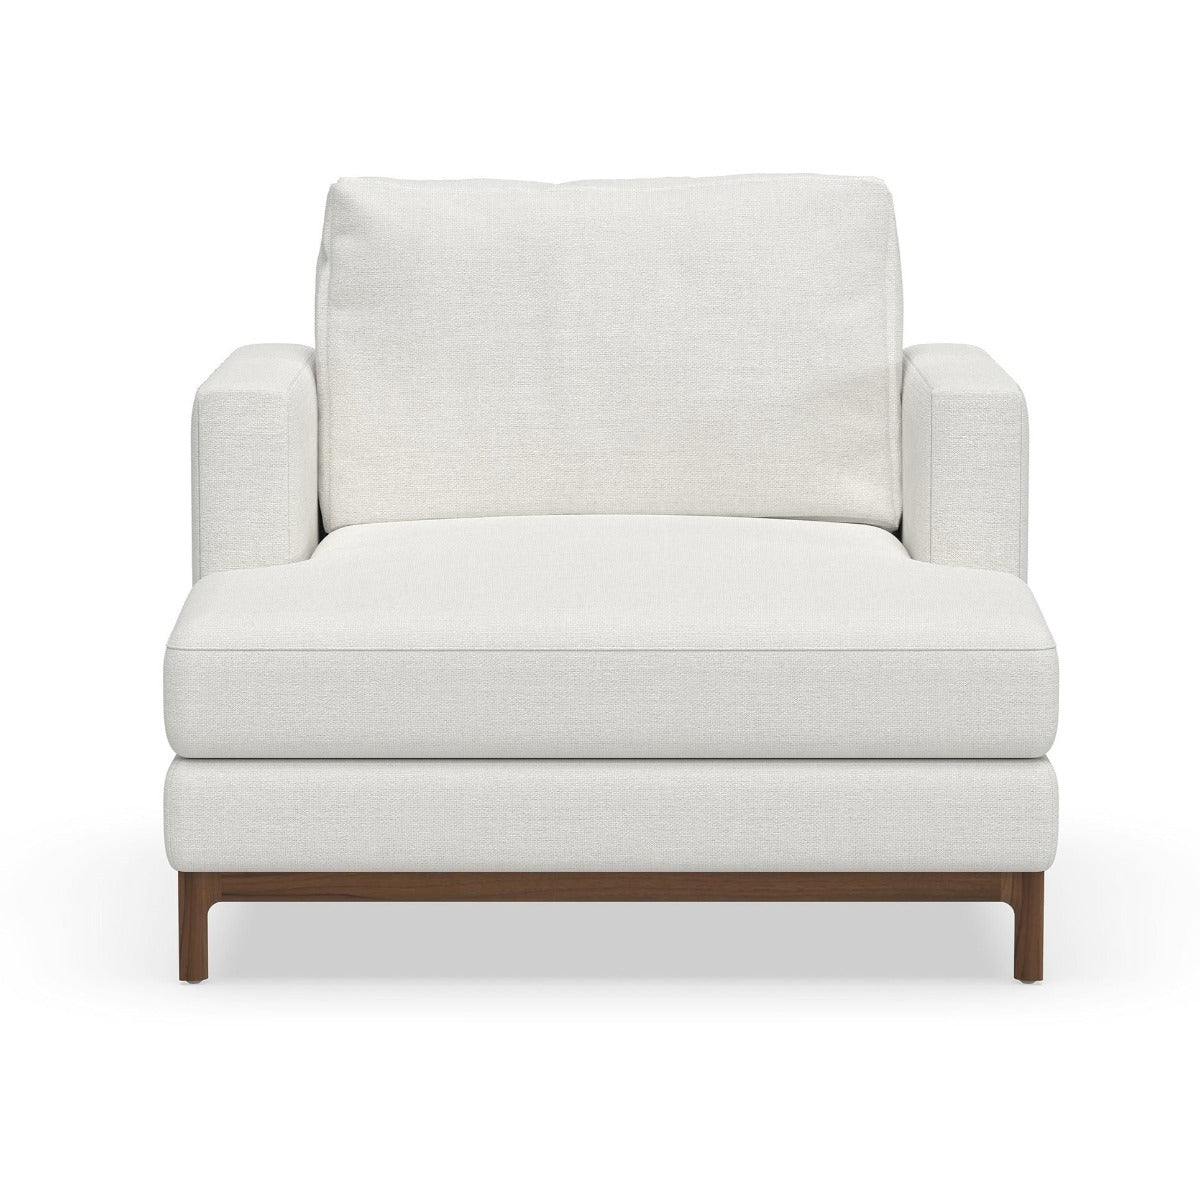 Qi Collection - Sofa by Stellar Works | Do Shop